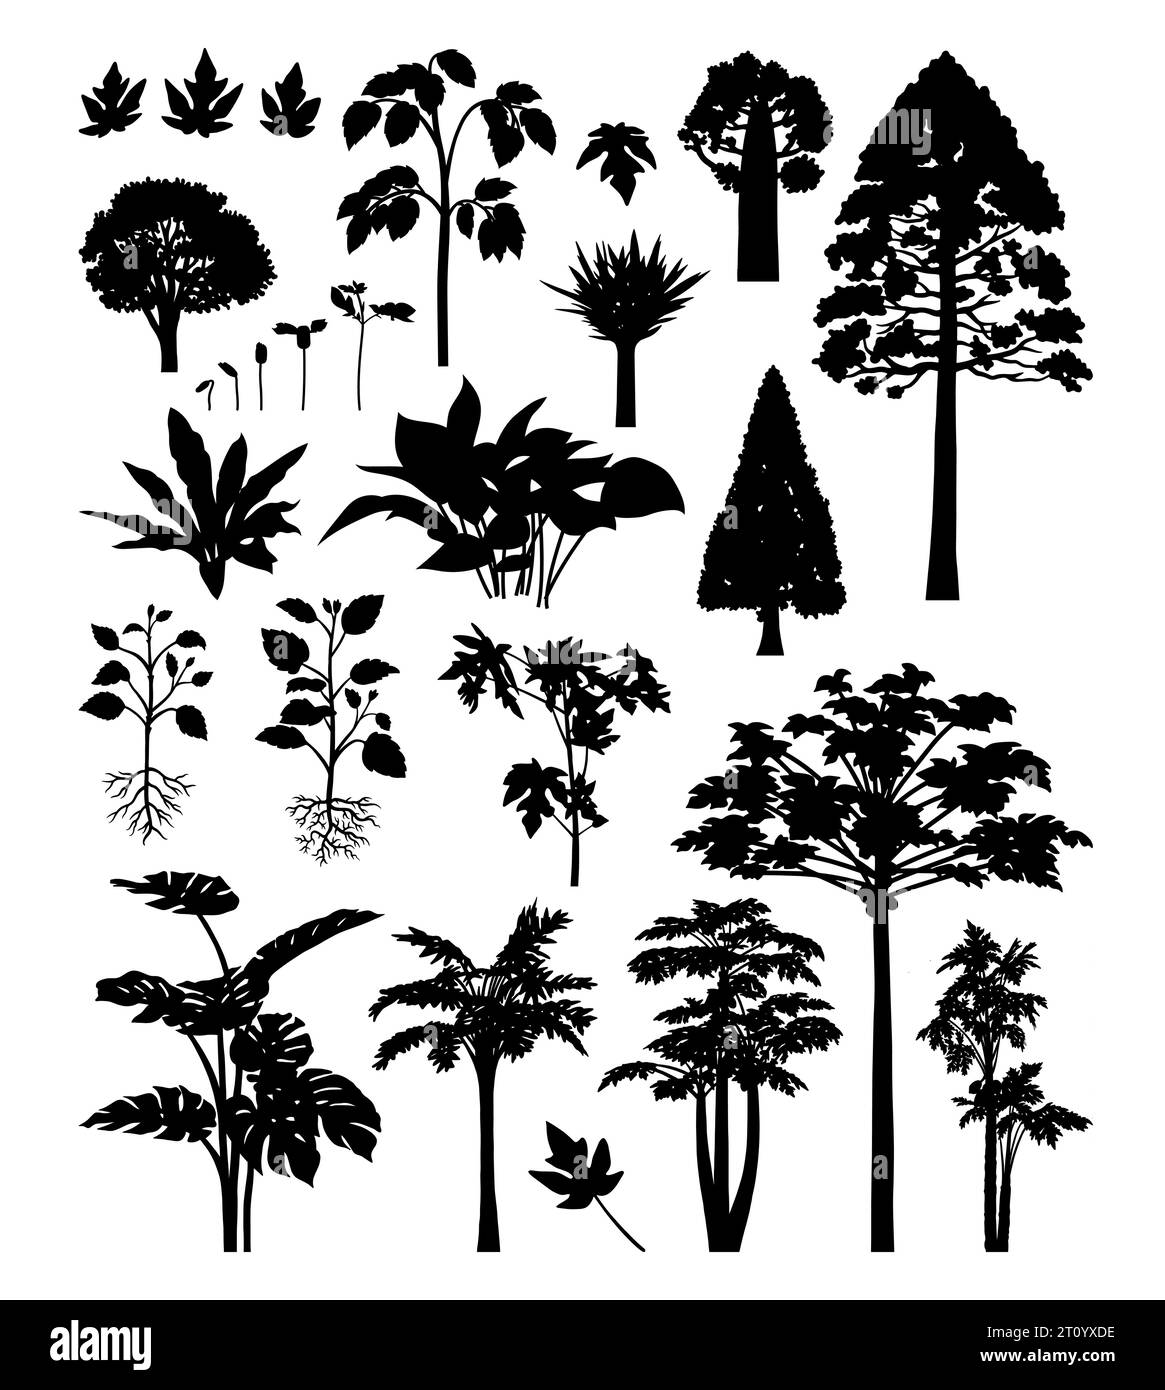 palm tree and plants element silhouettes Stock Vector